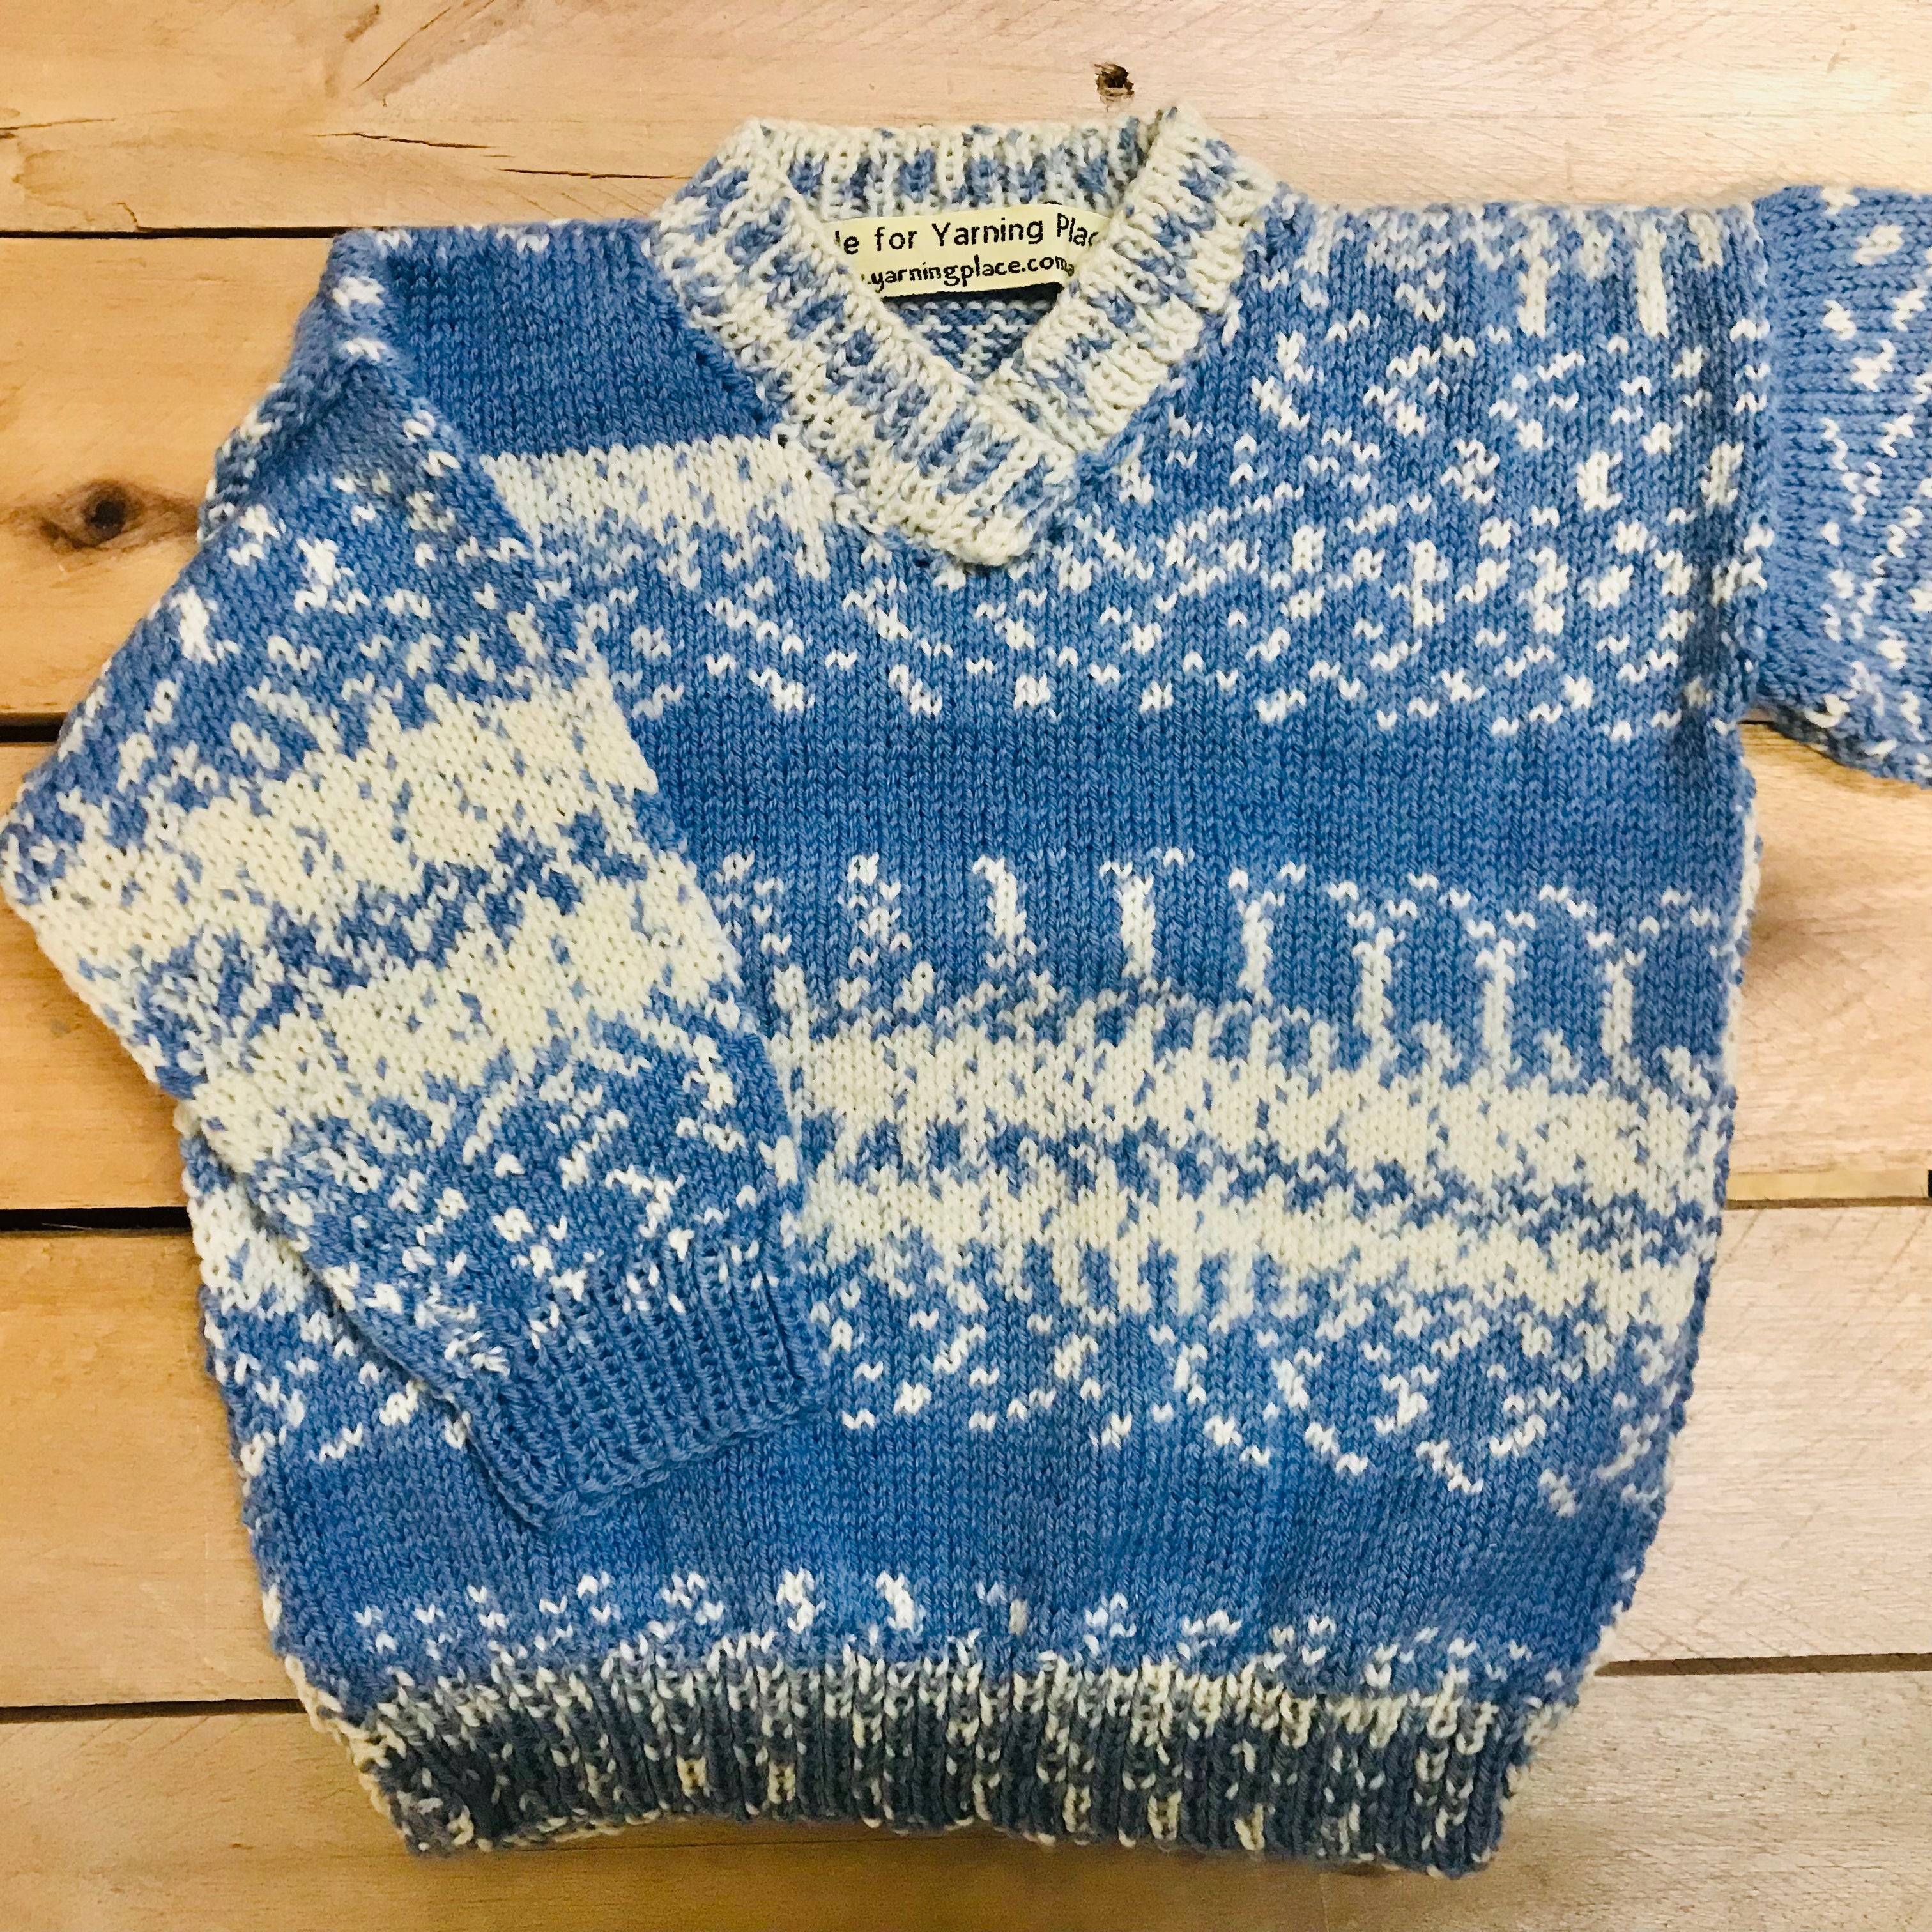 hand-knitted locally - Child Blue greys variegated self patterning  Jumper